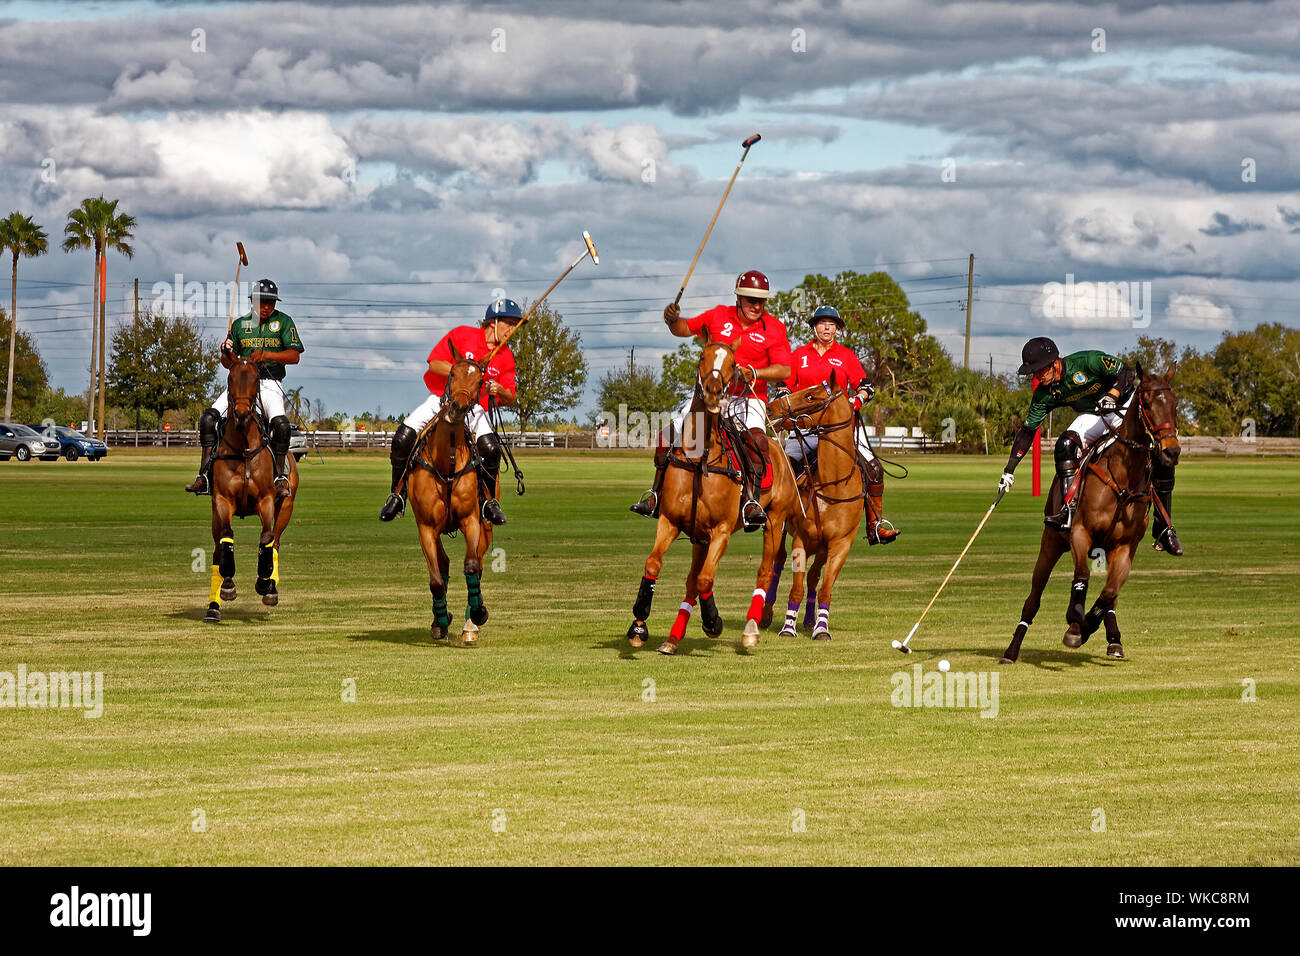 polo match; horses; 5 players; 2 teams; mallets, fast pace; action; hitting ball; sport; skill, competition; grassy field, Sarasota Polo Club; Lakewoo Stock Photo